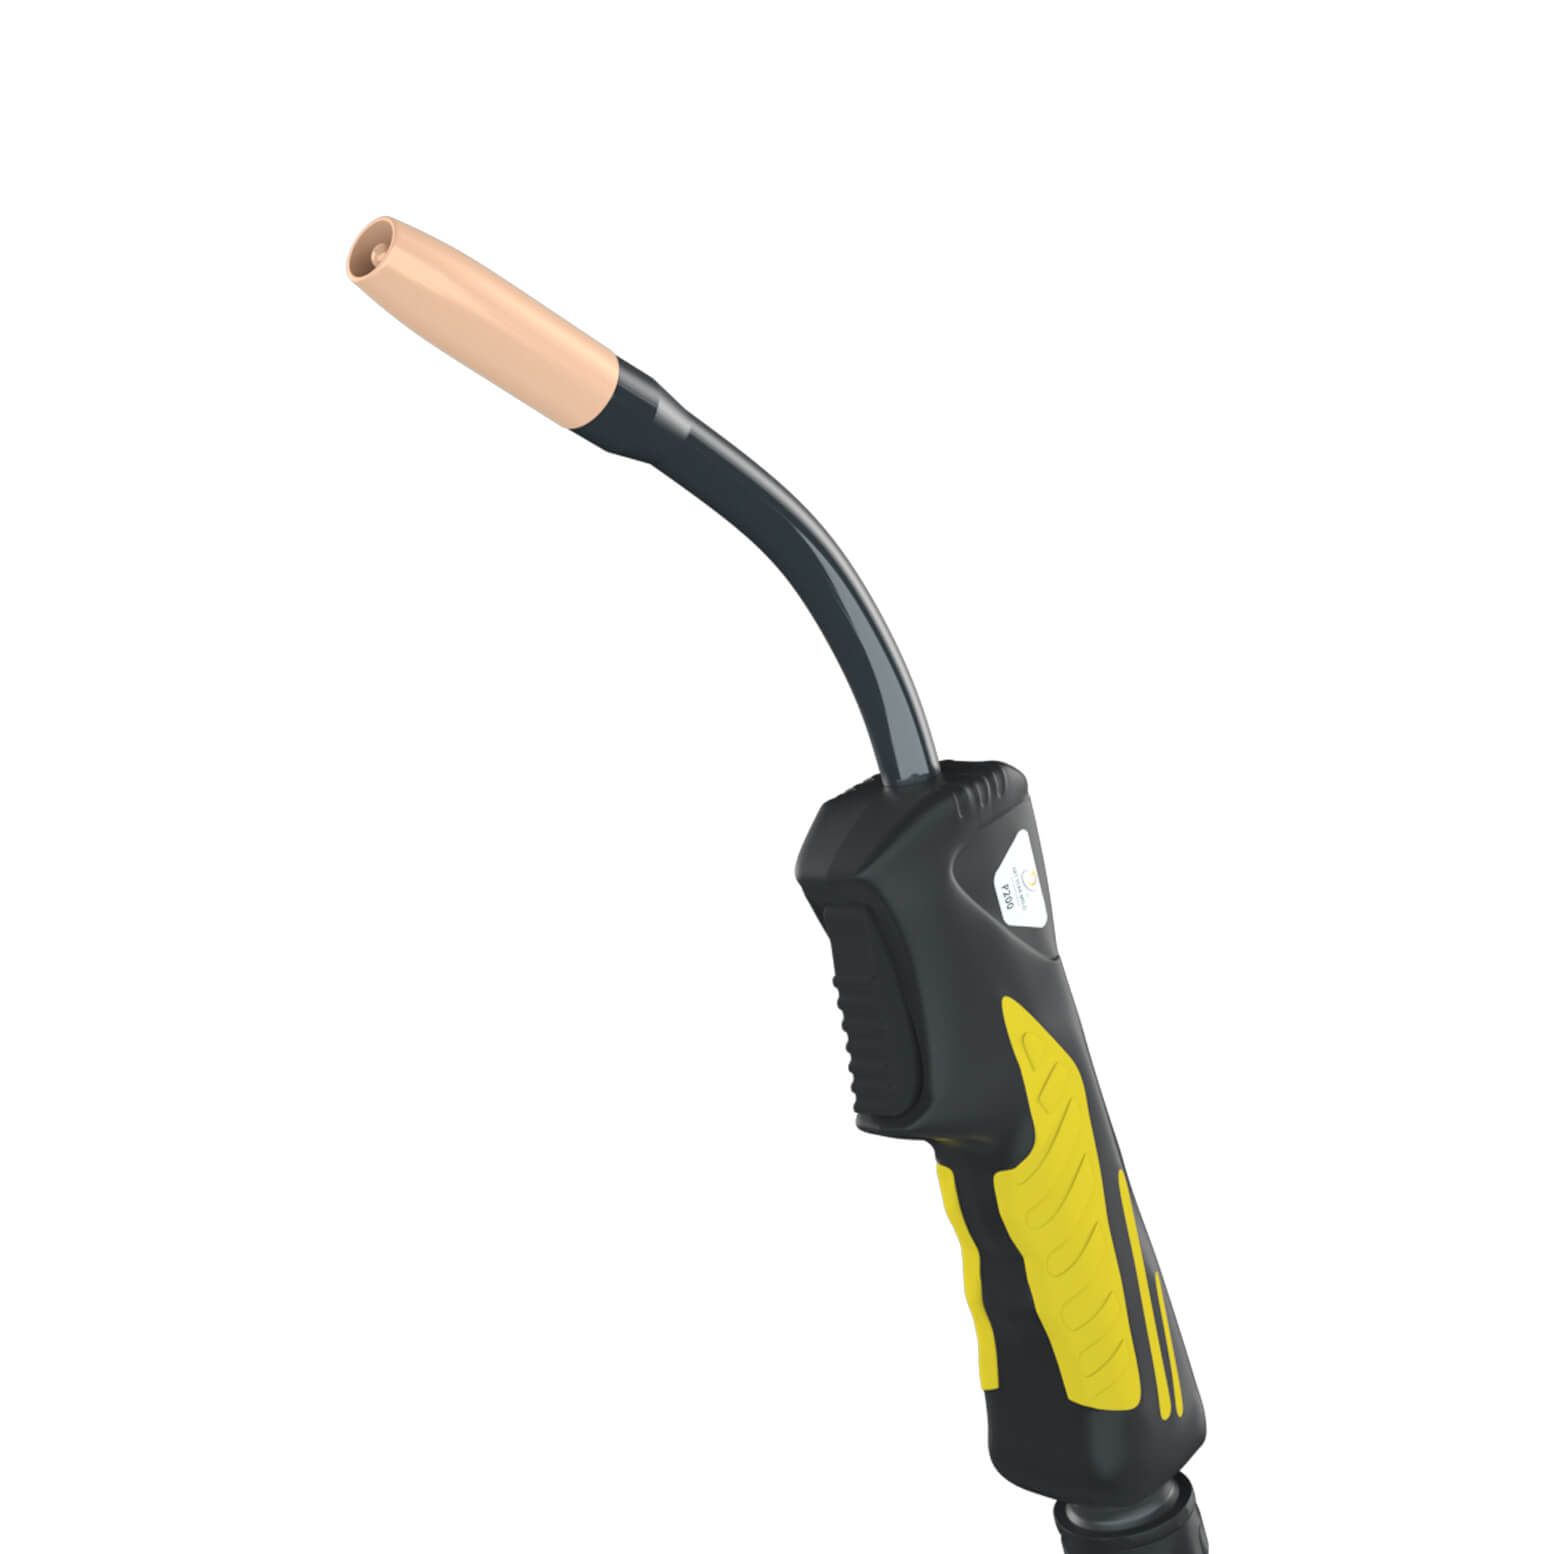 Get Star Weld PANA GSW-200 Air Cooled MIG/MAG Welding Torch